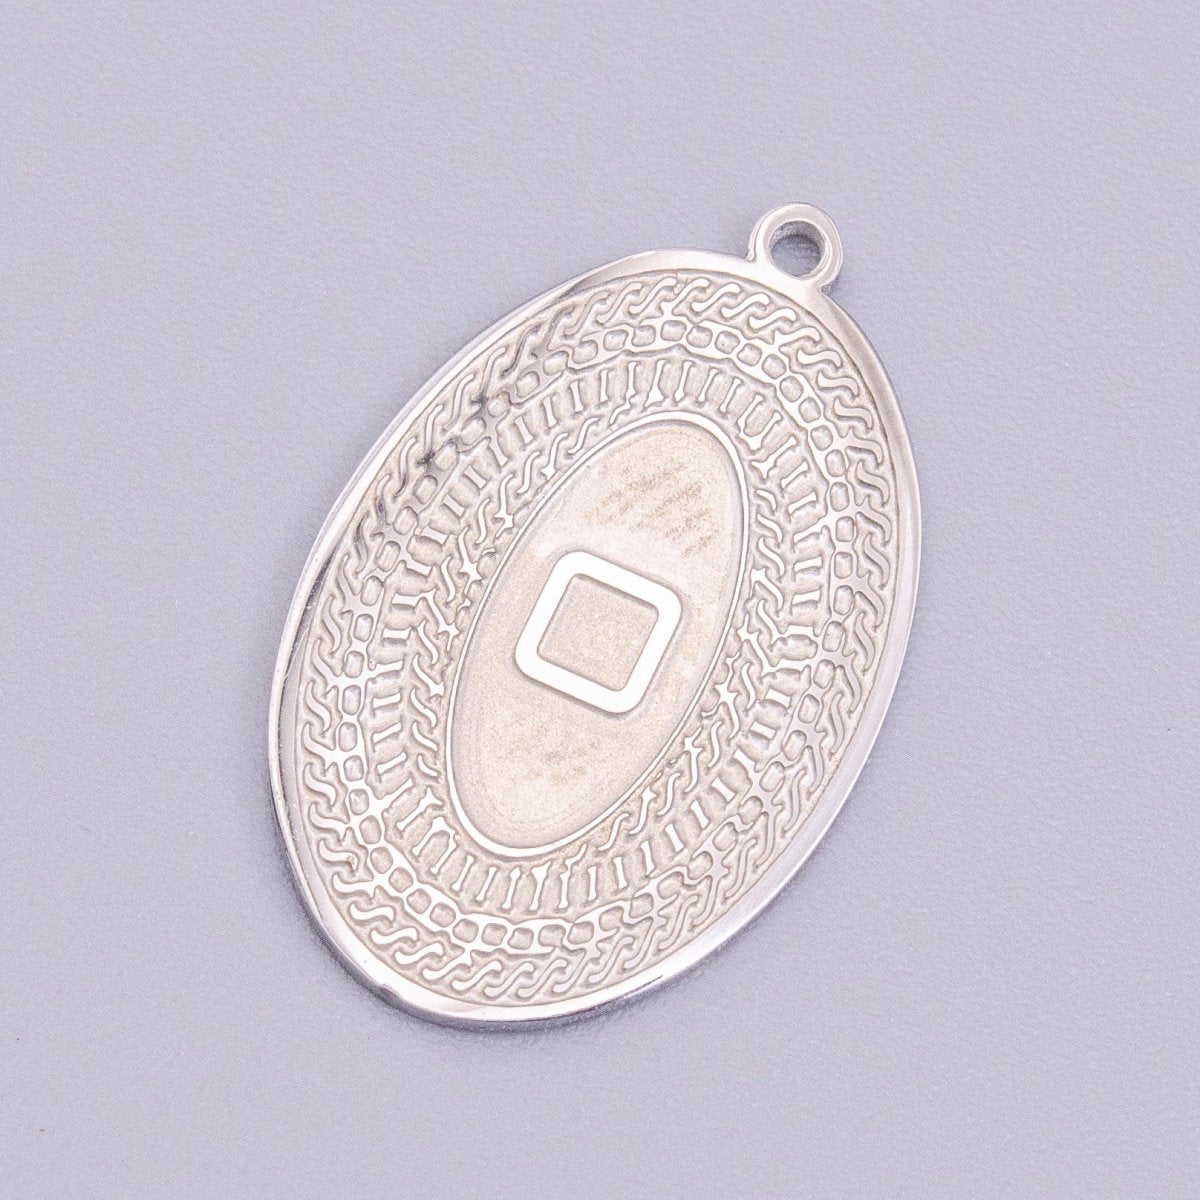 Stainless Steel 19.5mm Geometric Engraved Box Oval Charm in Gold & Silver | P-919 - DLUXCA